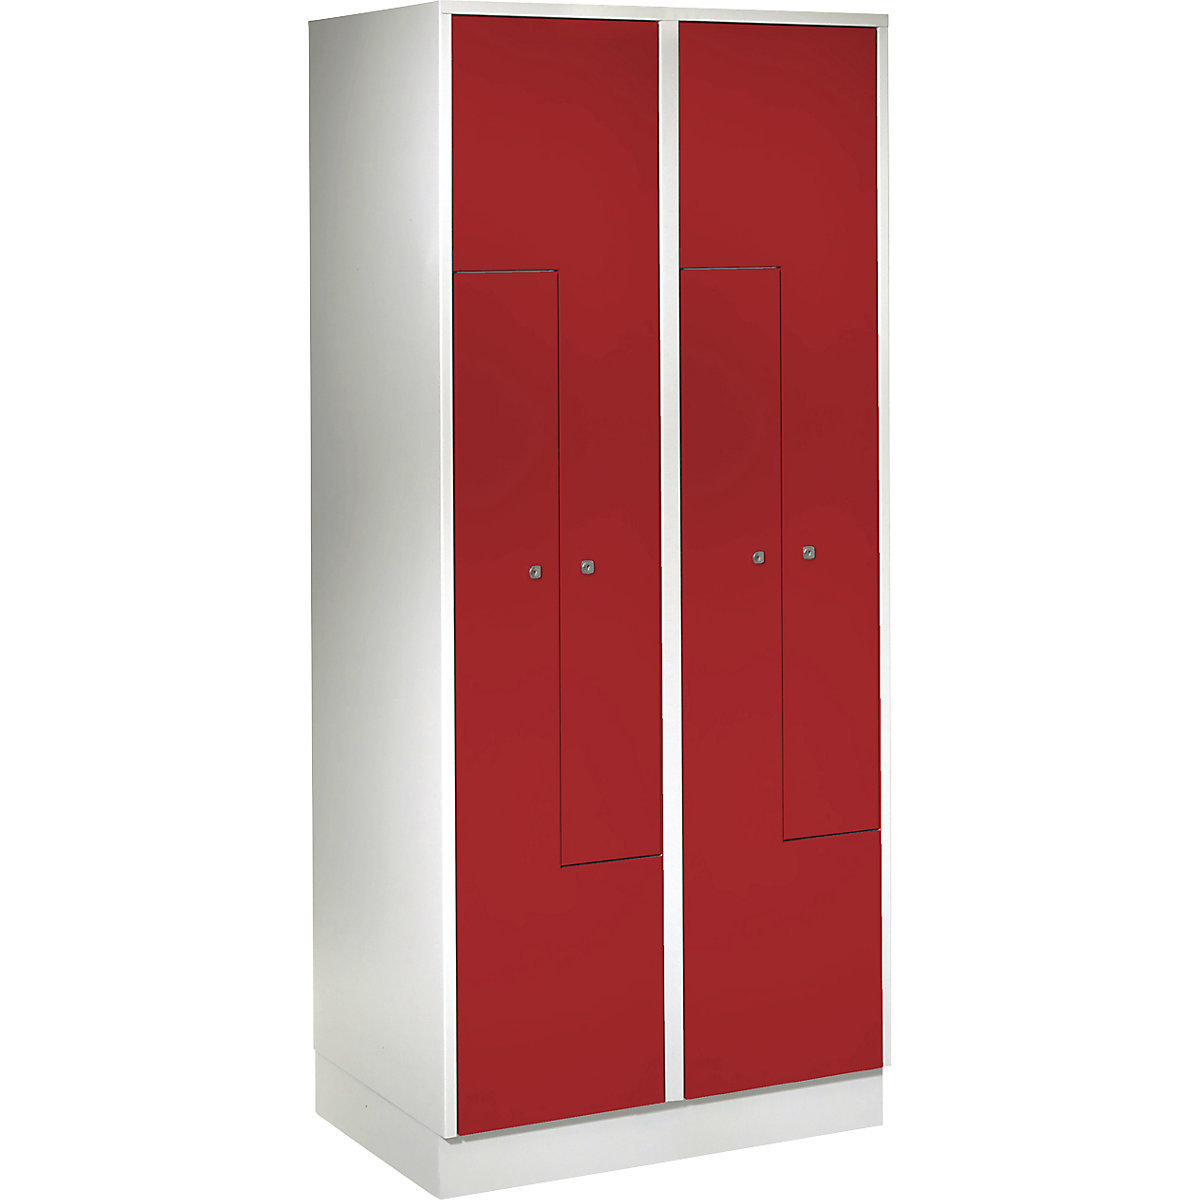 Z cloakroom locker – Wolf, 4 compartments, doors flame red-14